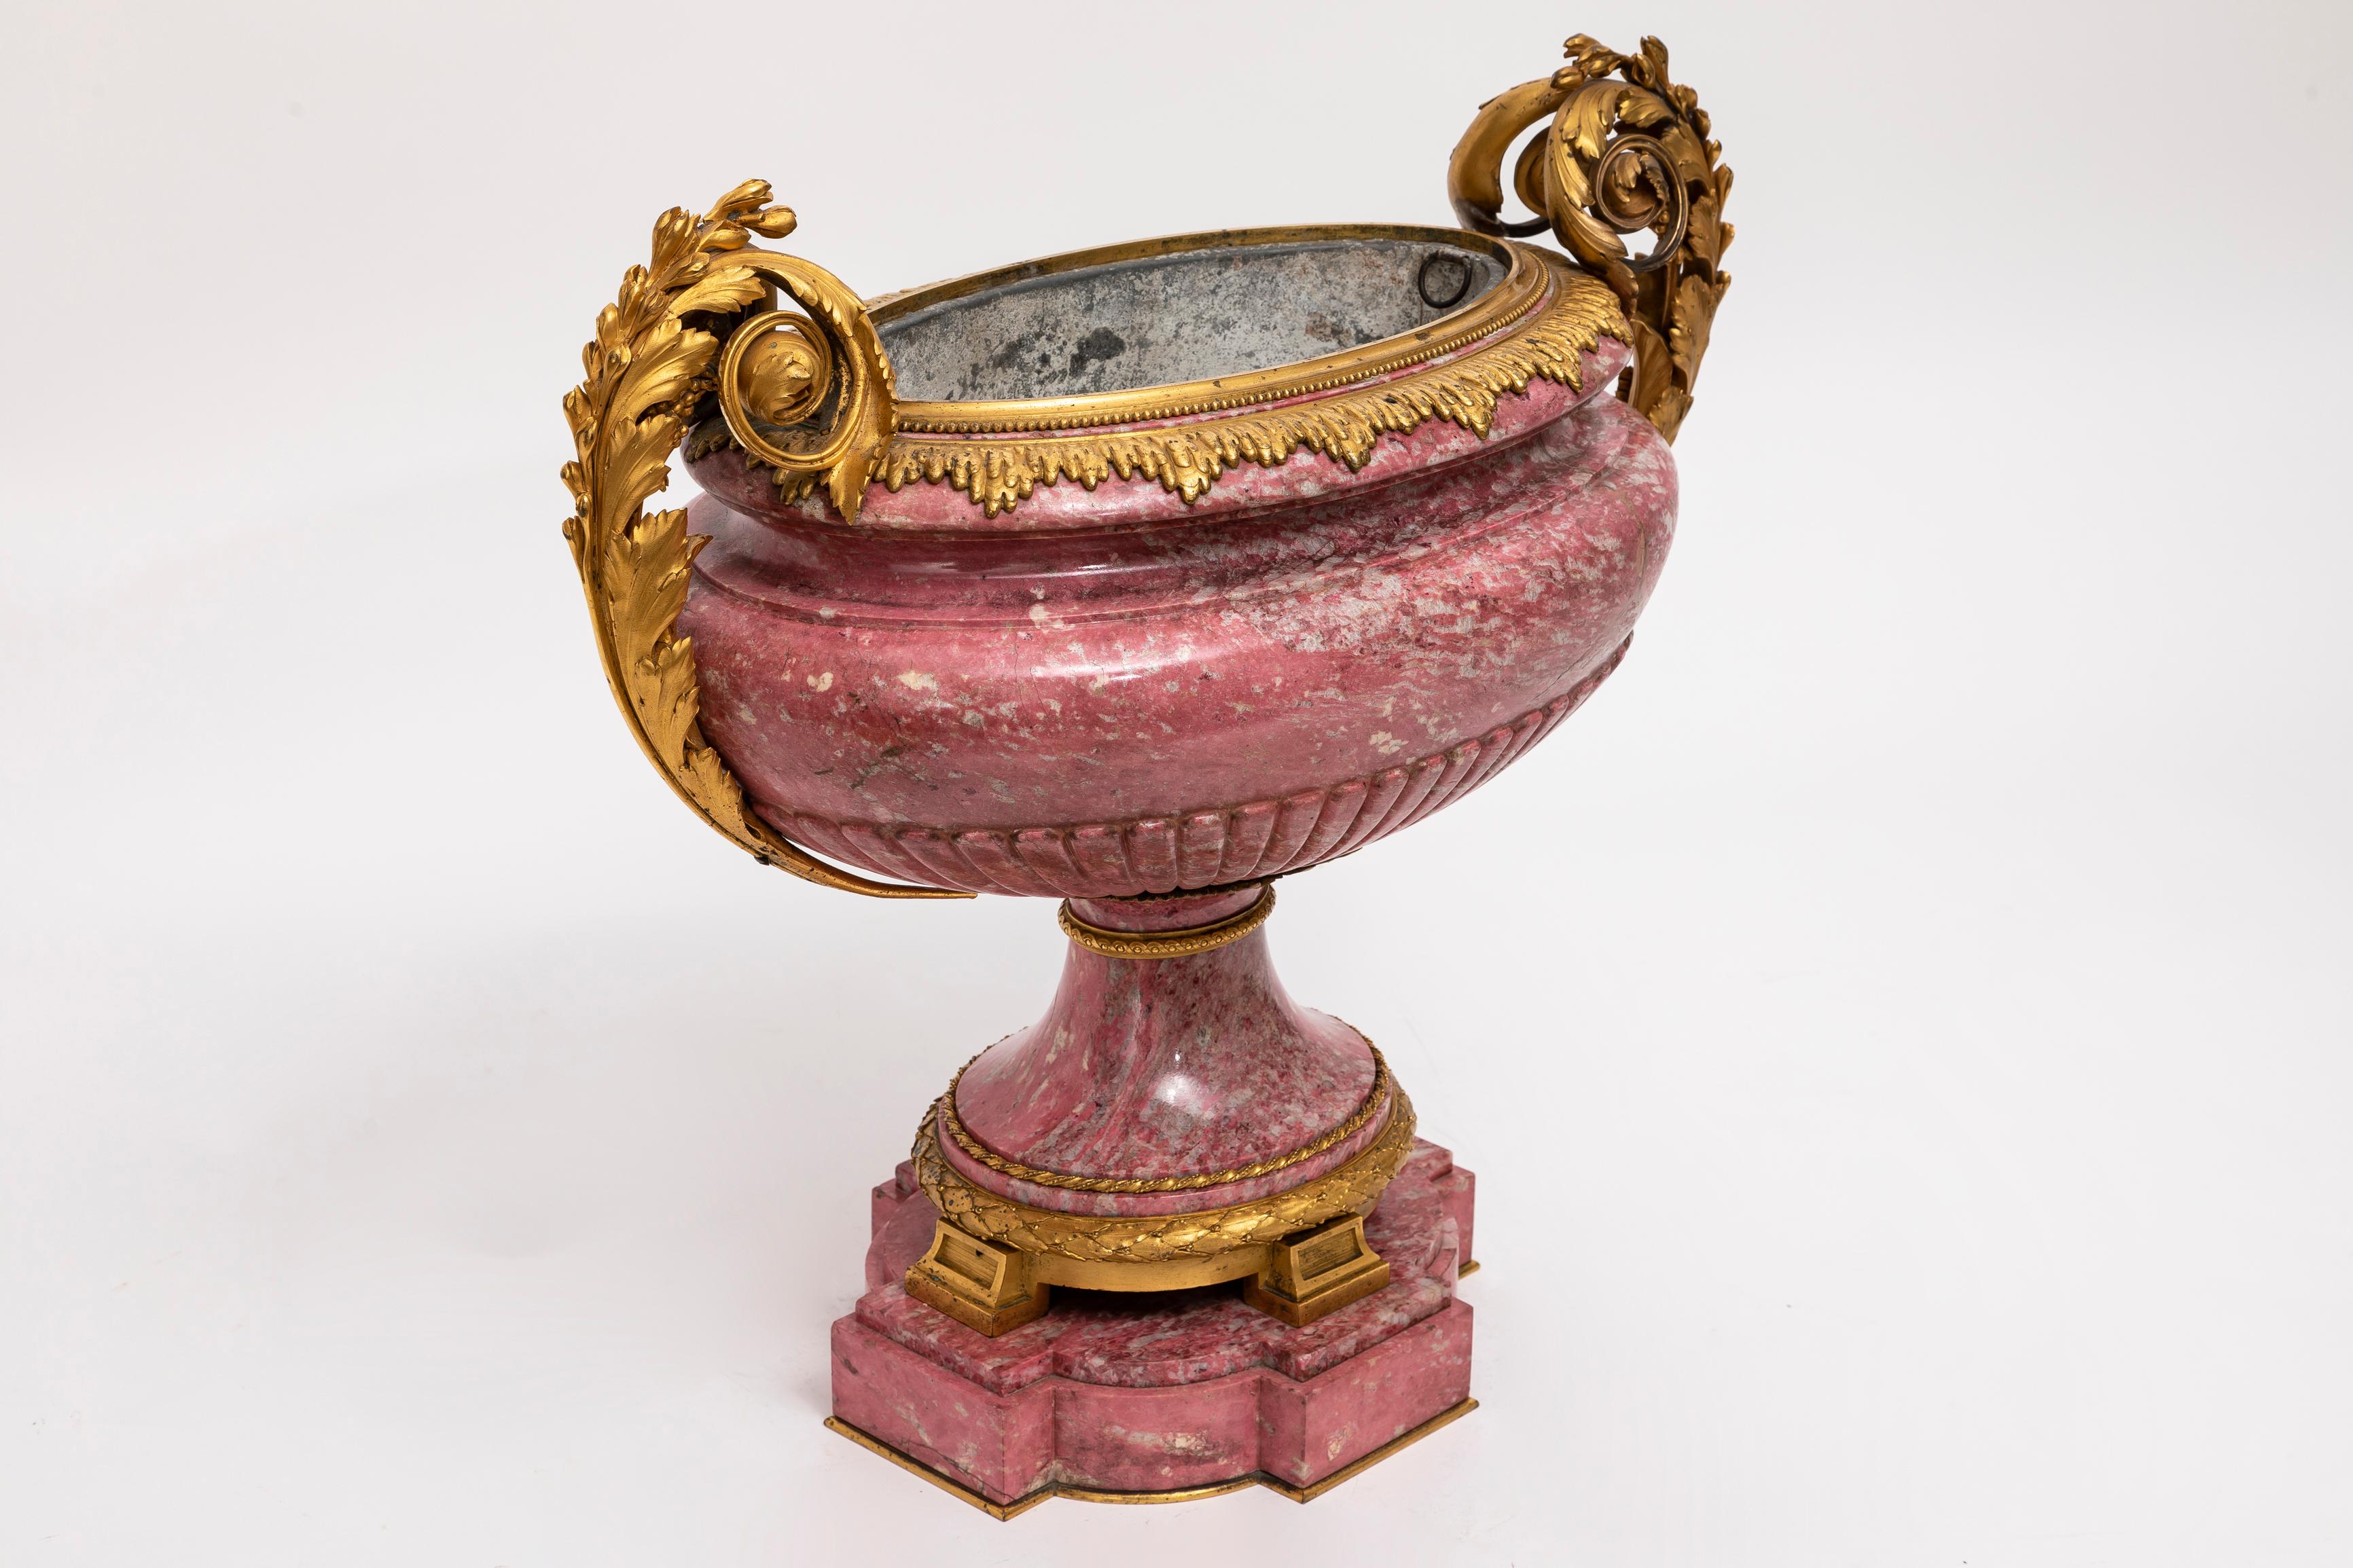  A Fabulous and Large 19th Century Russian Ormolu-Mounted Hand-Carved Pink Rhodonite Tazza/Centerpiece.  This tazza is a masterpiece of opulence that embodies the zenith of Russian art. This elegant tazza harmoniously marries meticulous